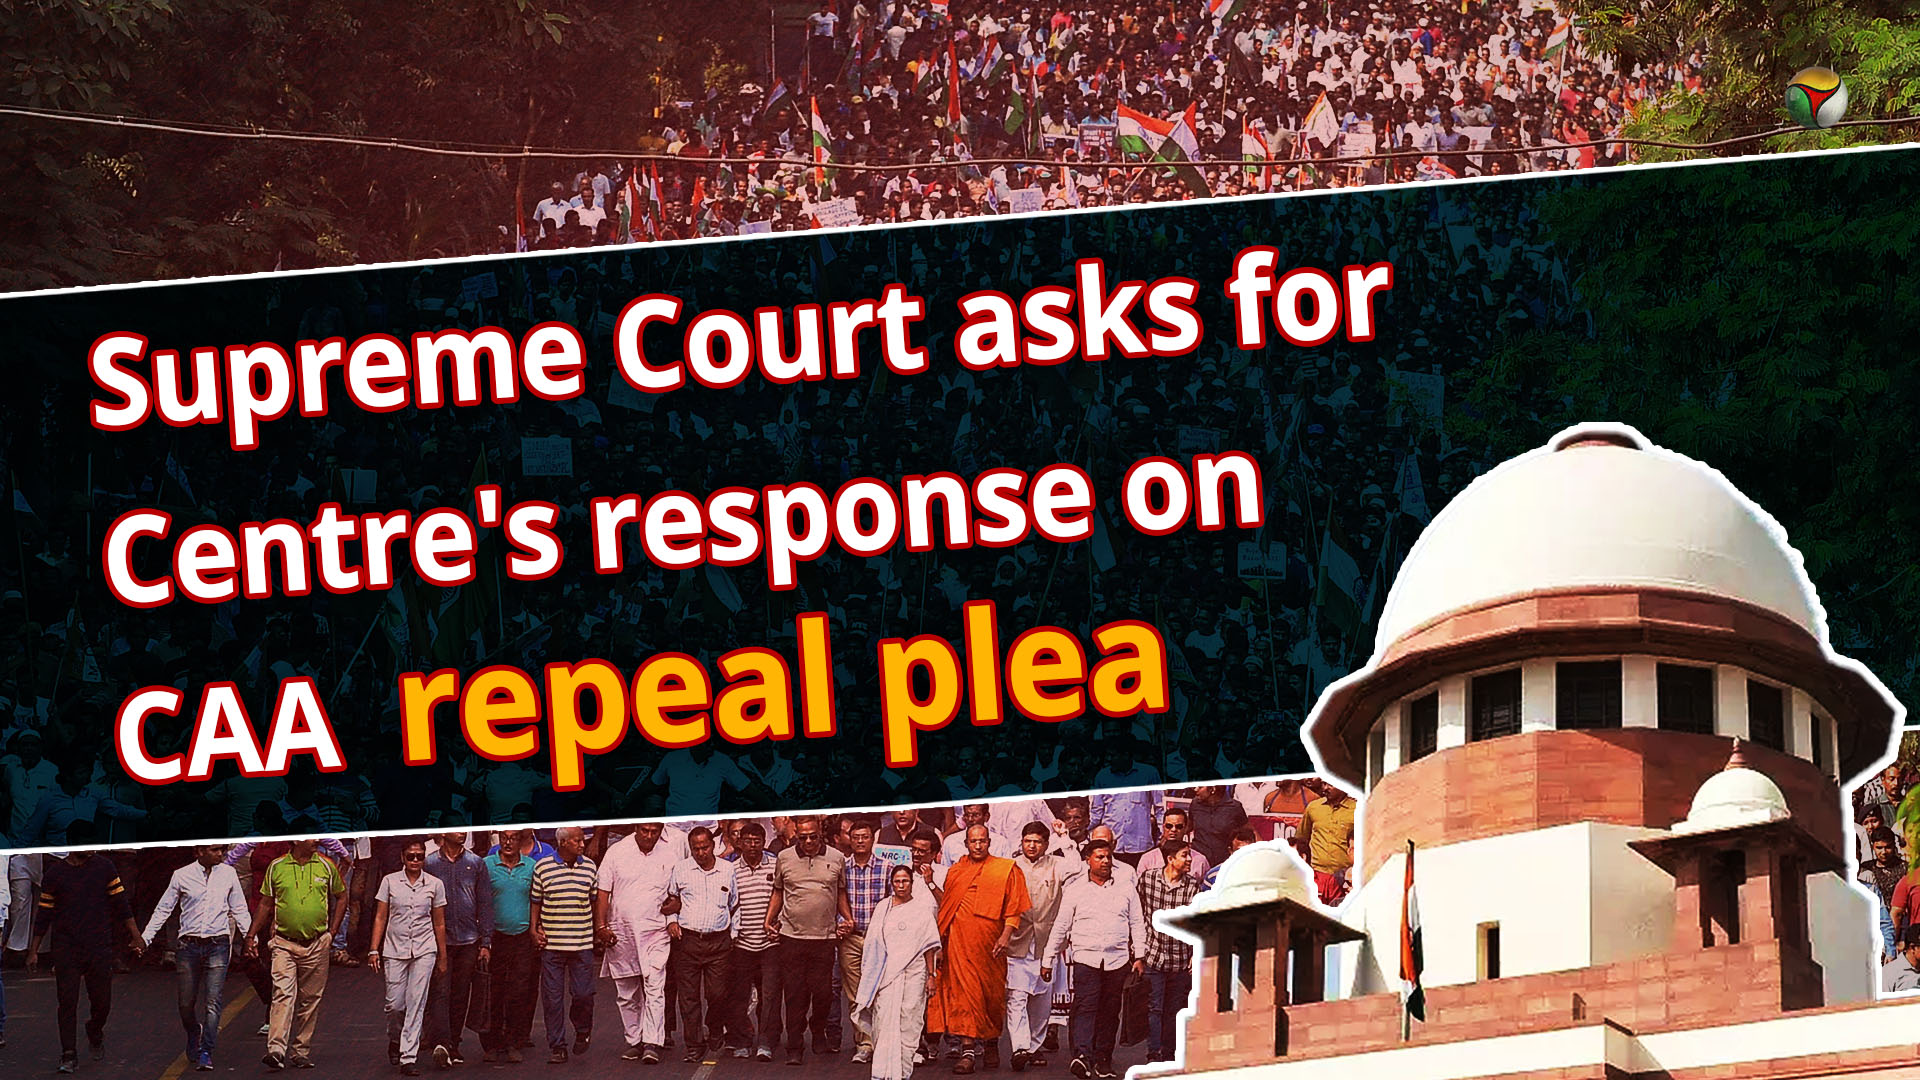 Supreme Court asks for Centres response on CAA repeal plea